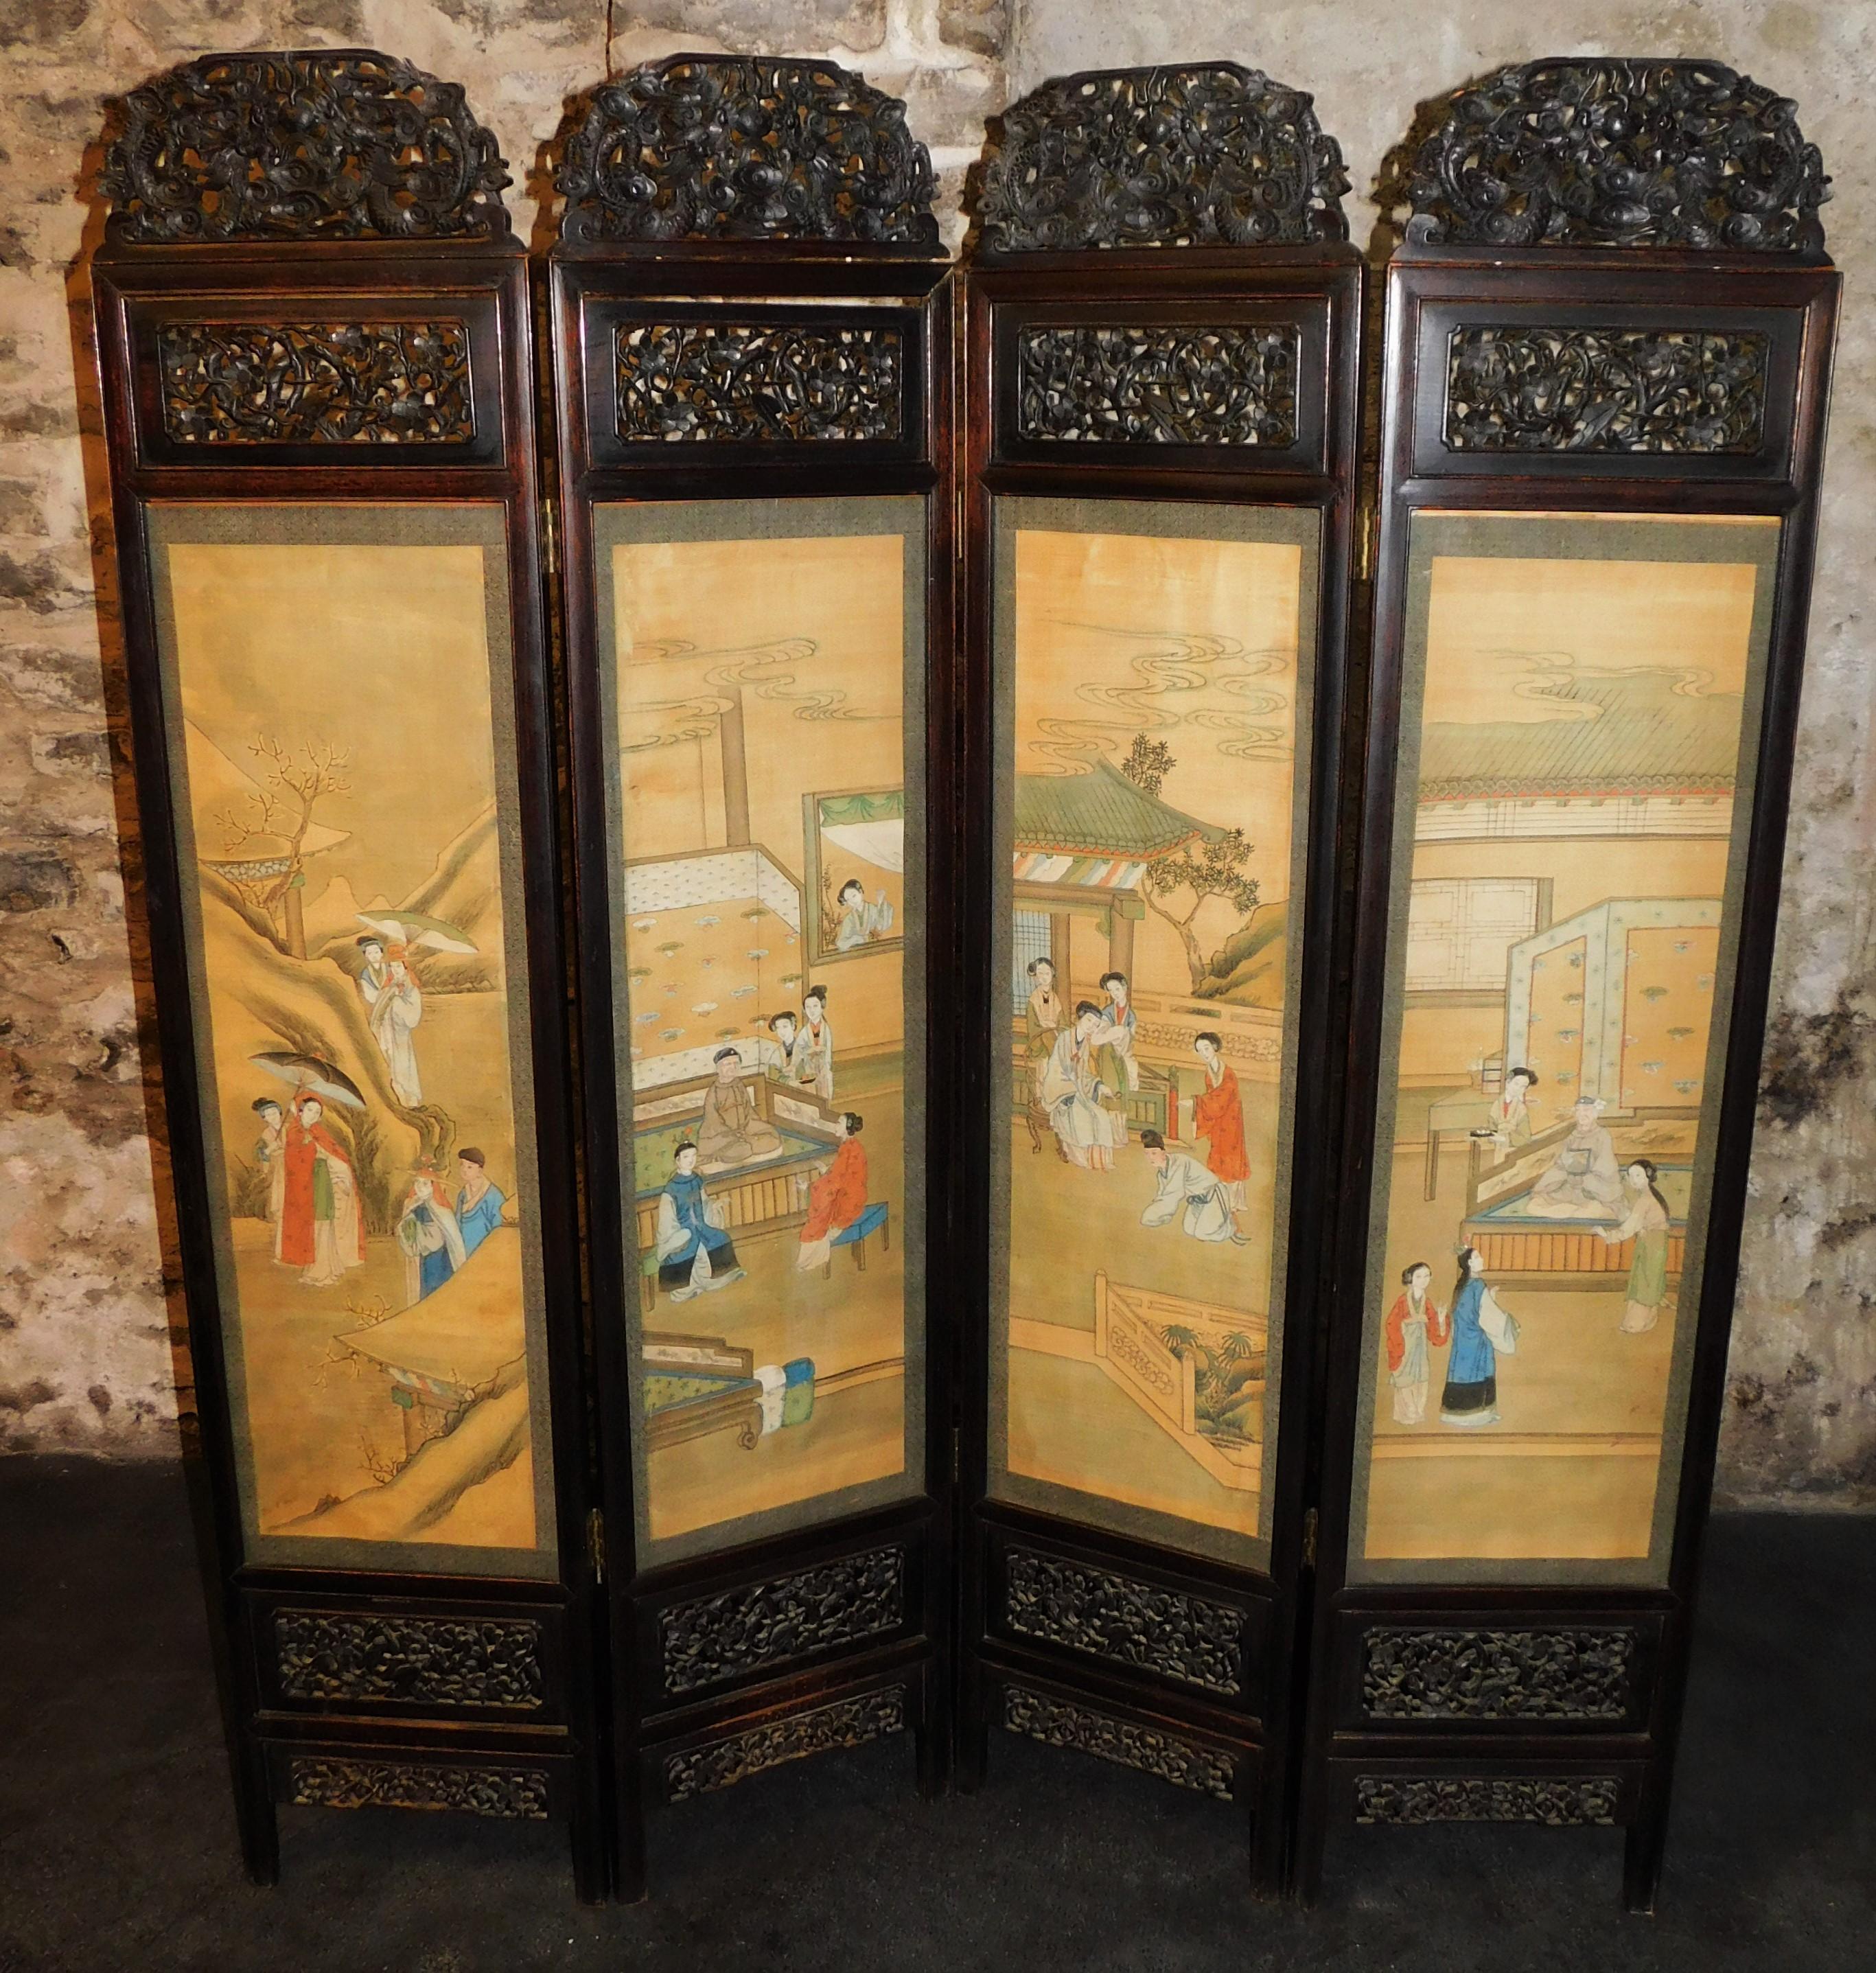 Ebonized wood four panel Chinese screen, circa 1850. Allegorical story depicting the dream of the red chamber beautifully presented on this rare four-panel silk room divider screen. Intriguingly carved top and bottom sections of each screen.
Each